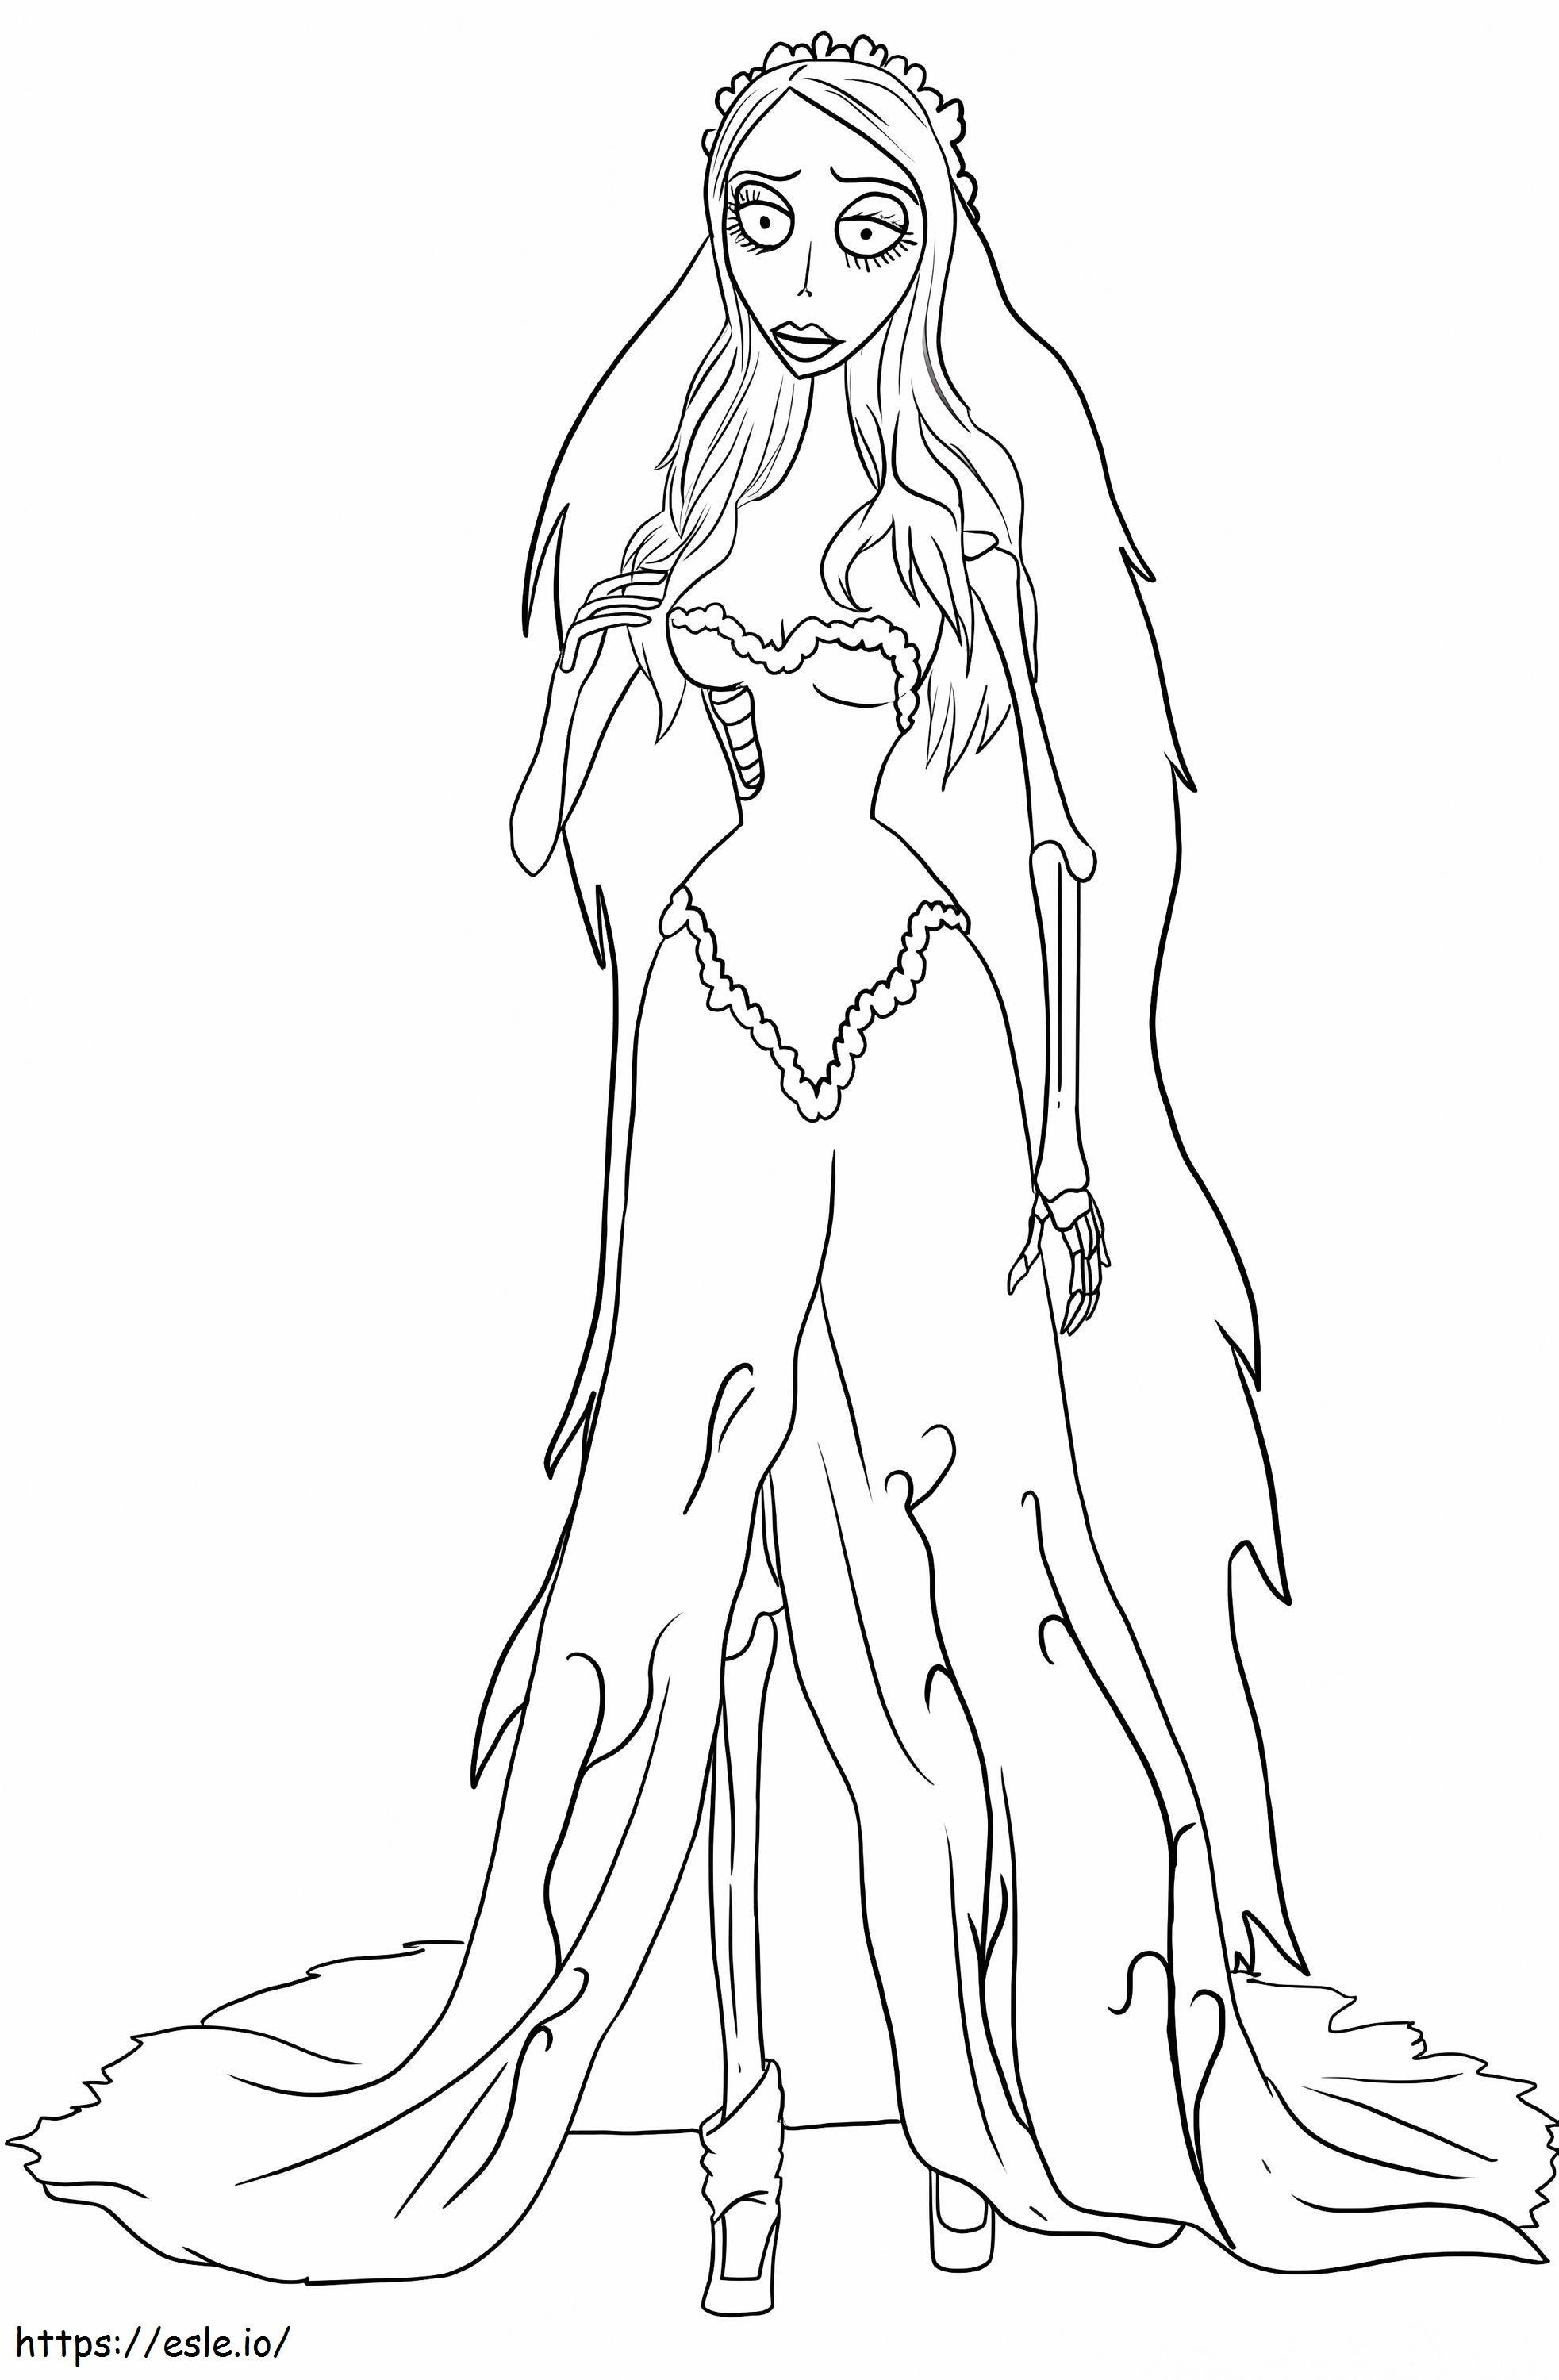 Corpse 3 coloring page